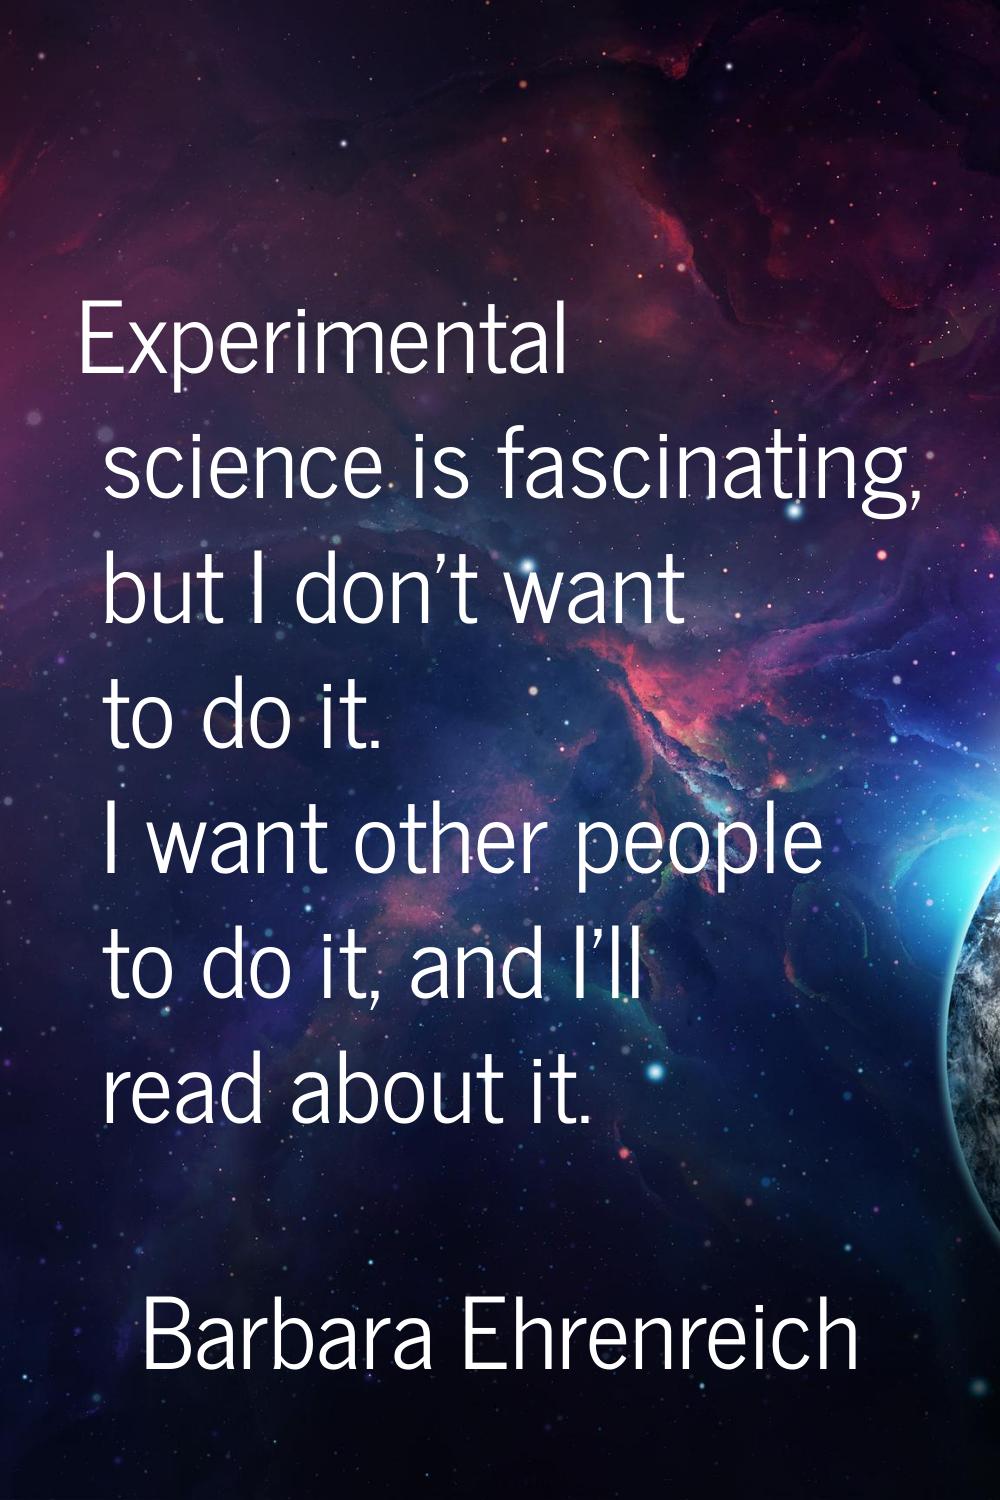 Experimental science is fascinating, but I don't want to do it. I want other people to do it, and I